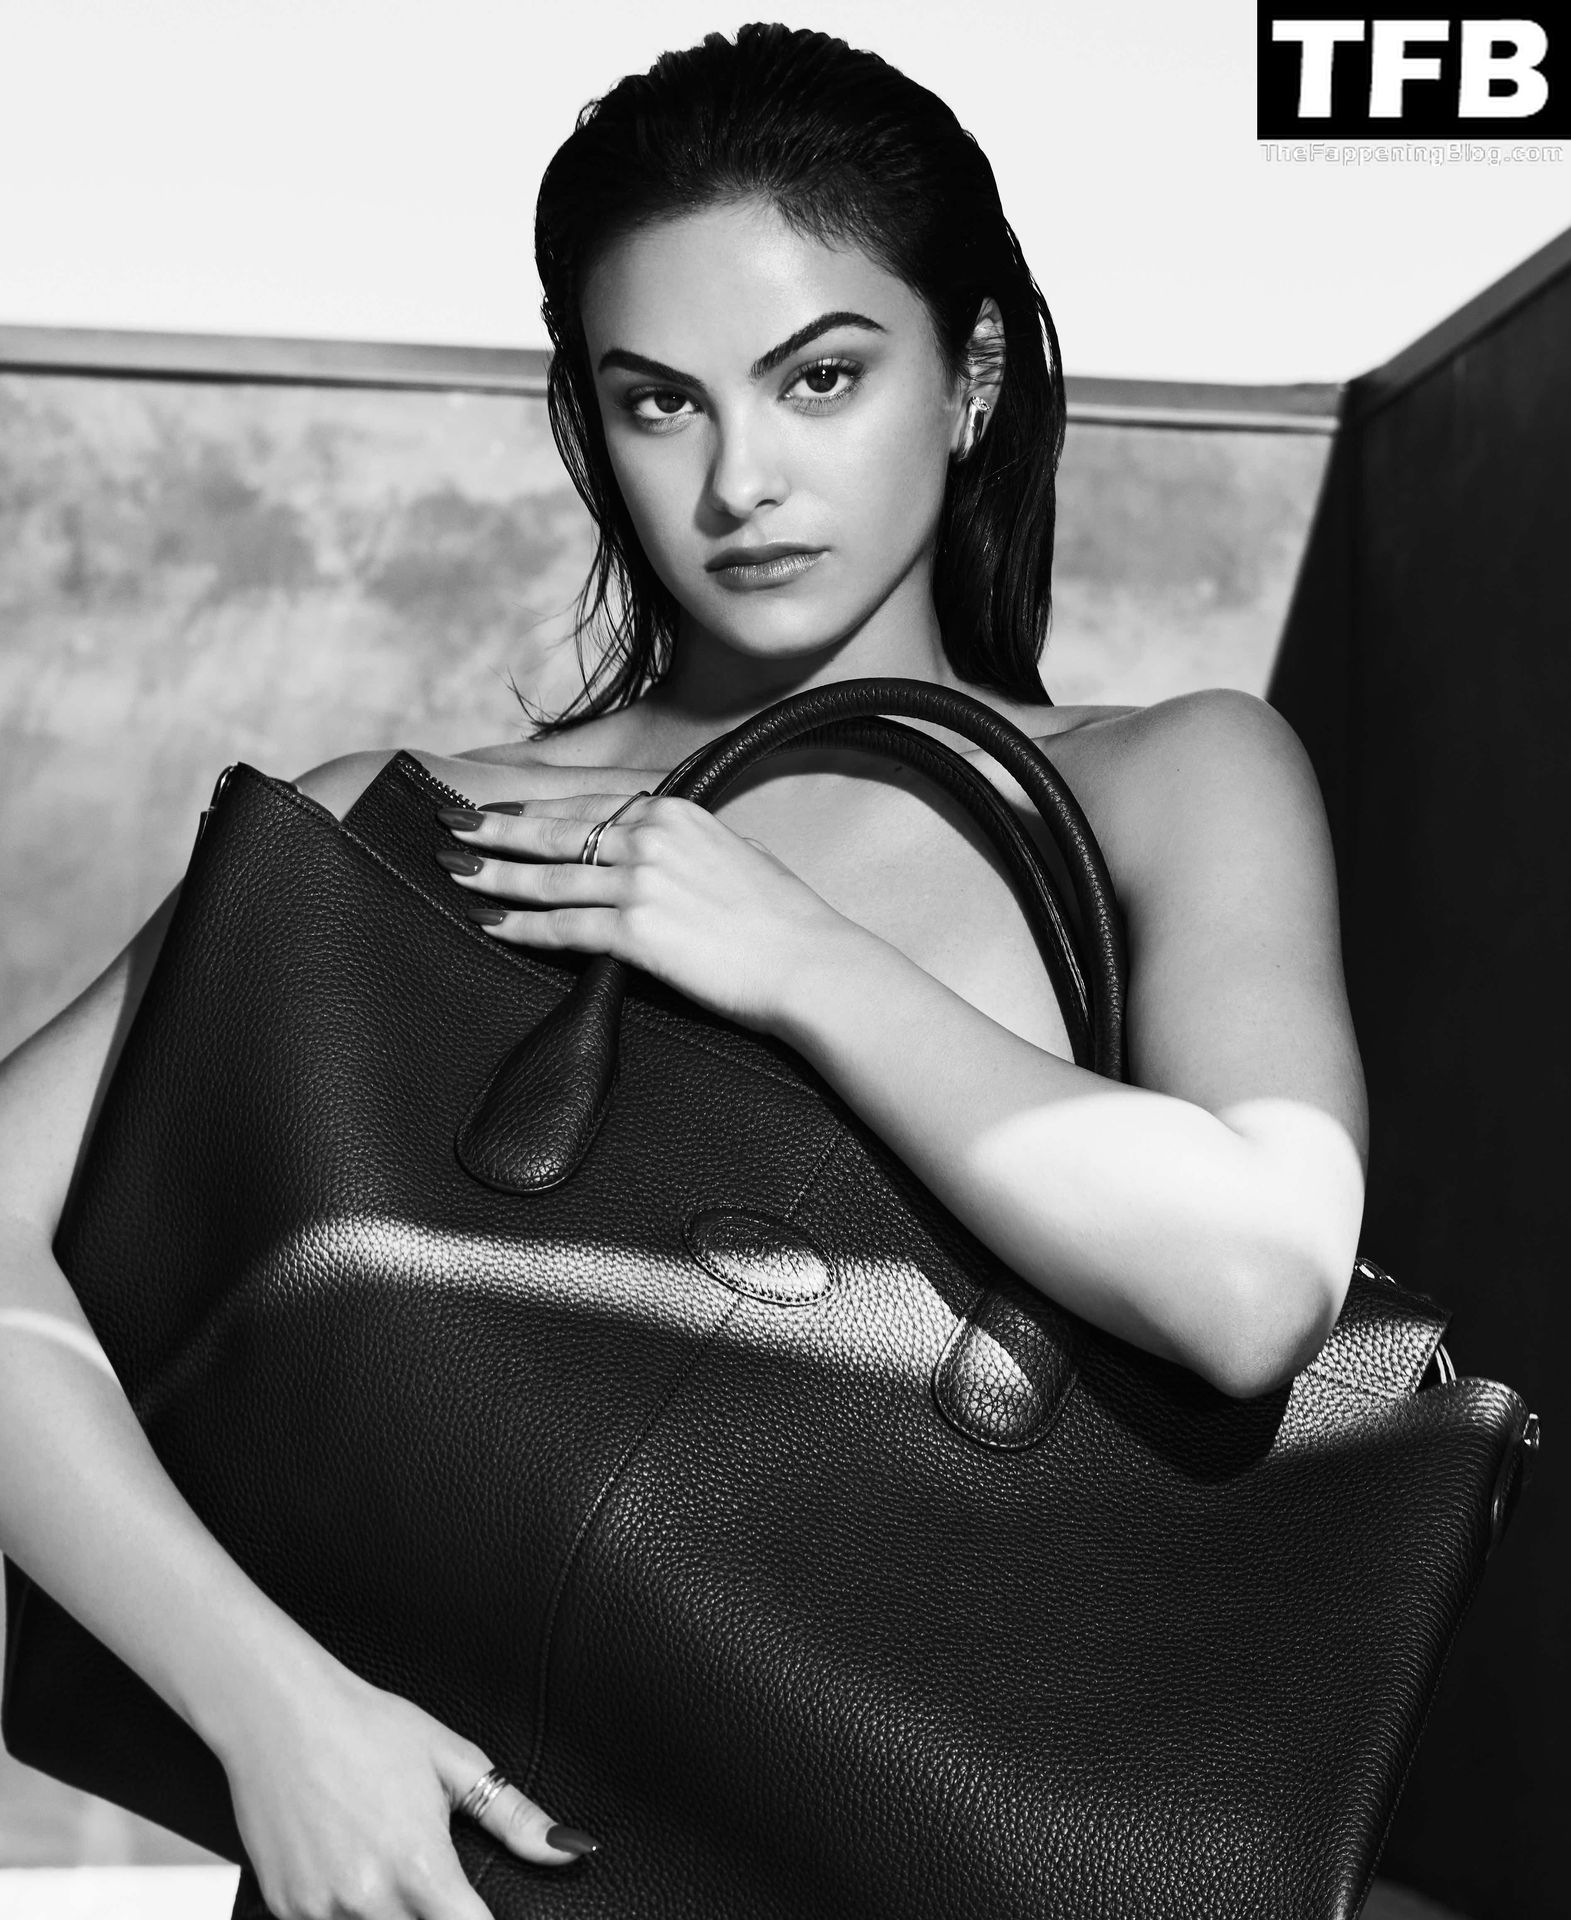 Camila-Mendes-Sexy-The-Fappening-Blog-12.jpg